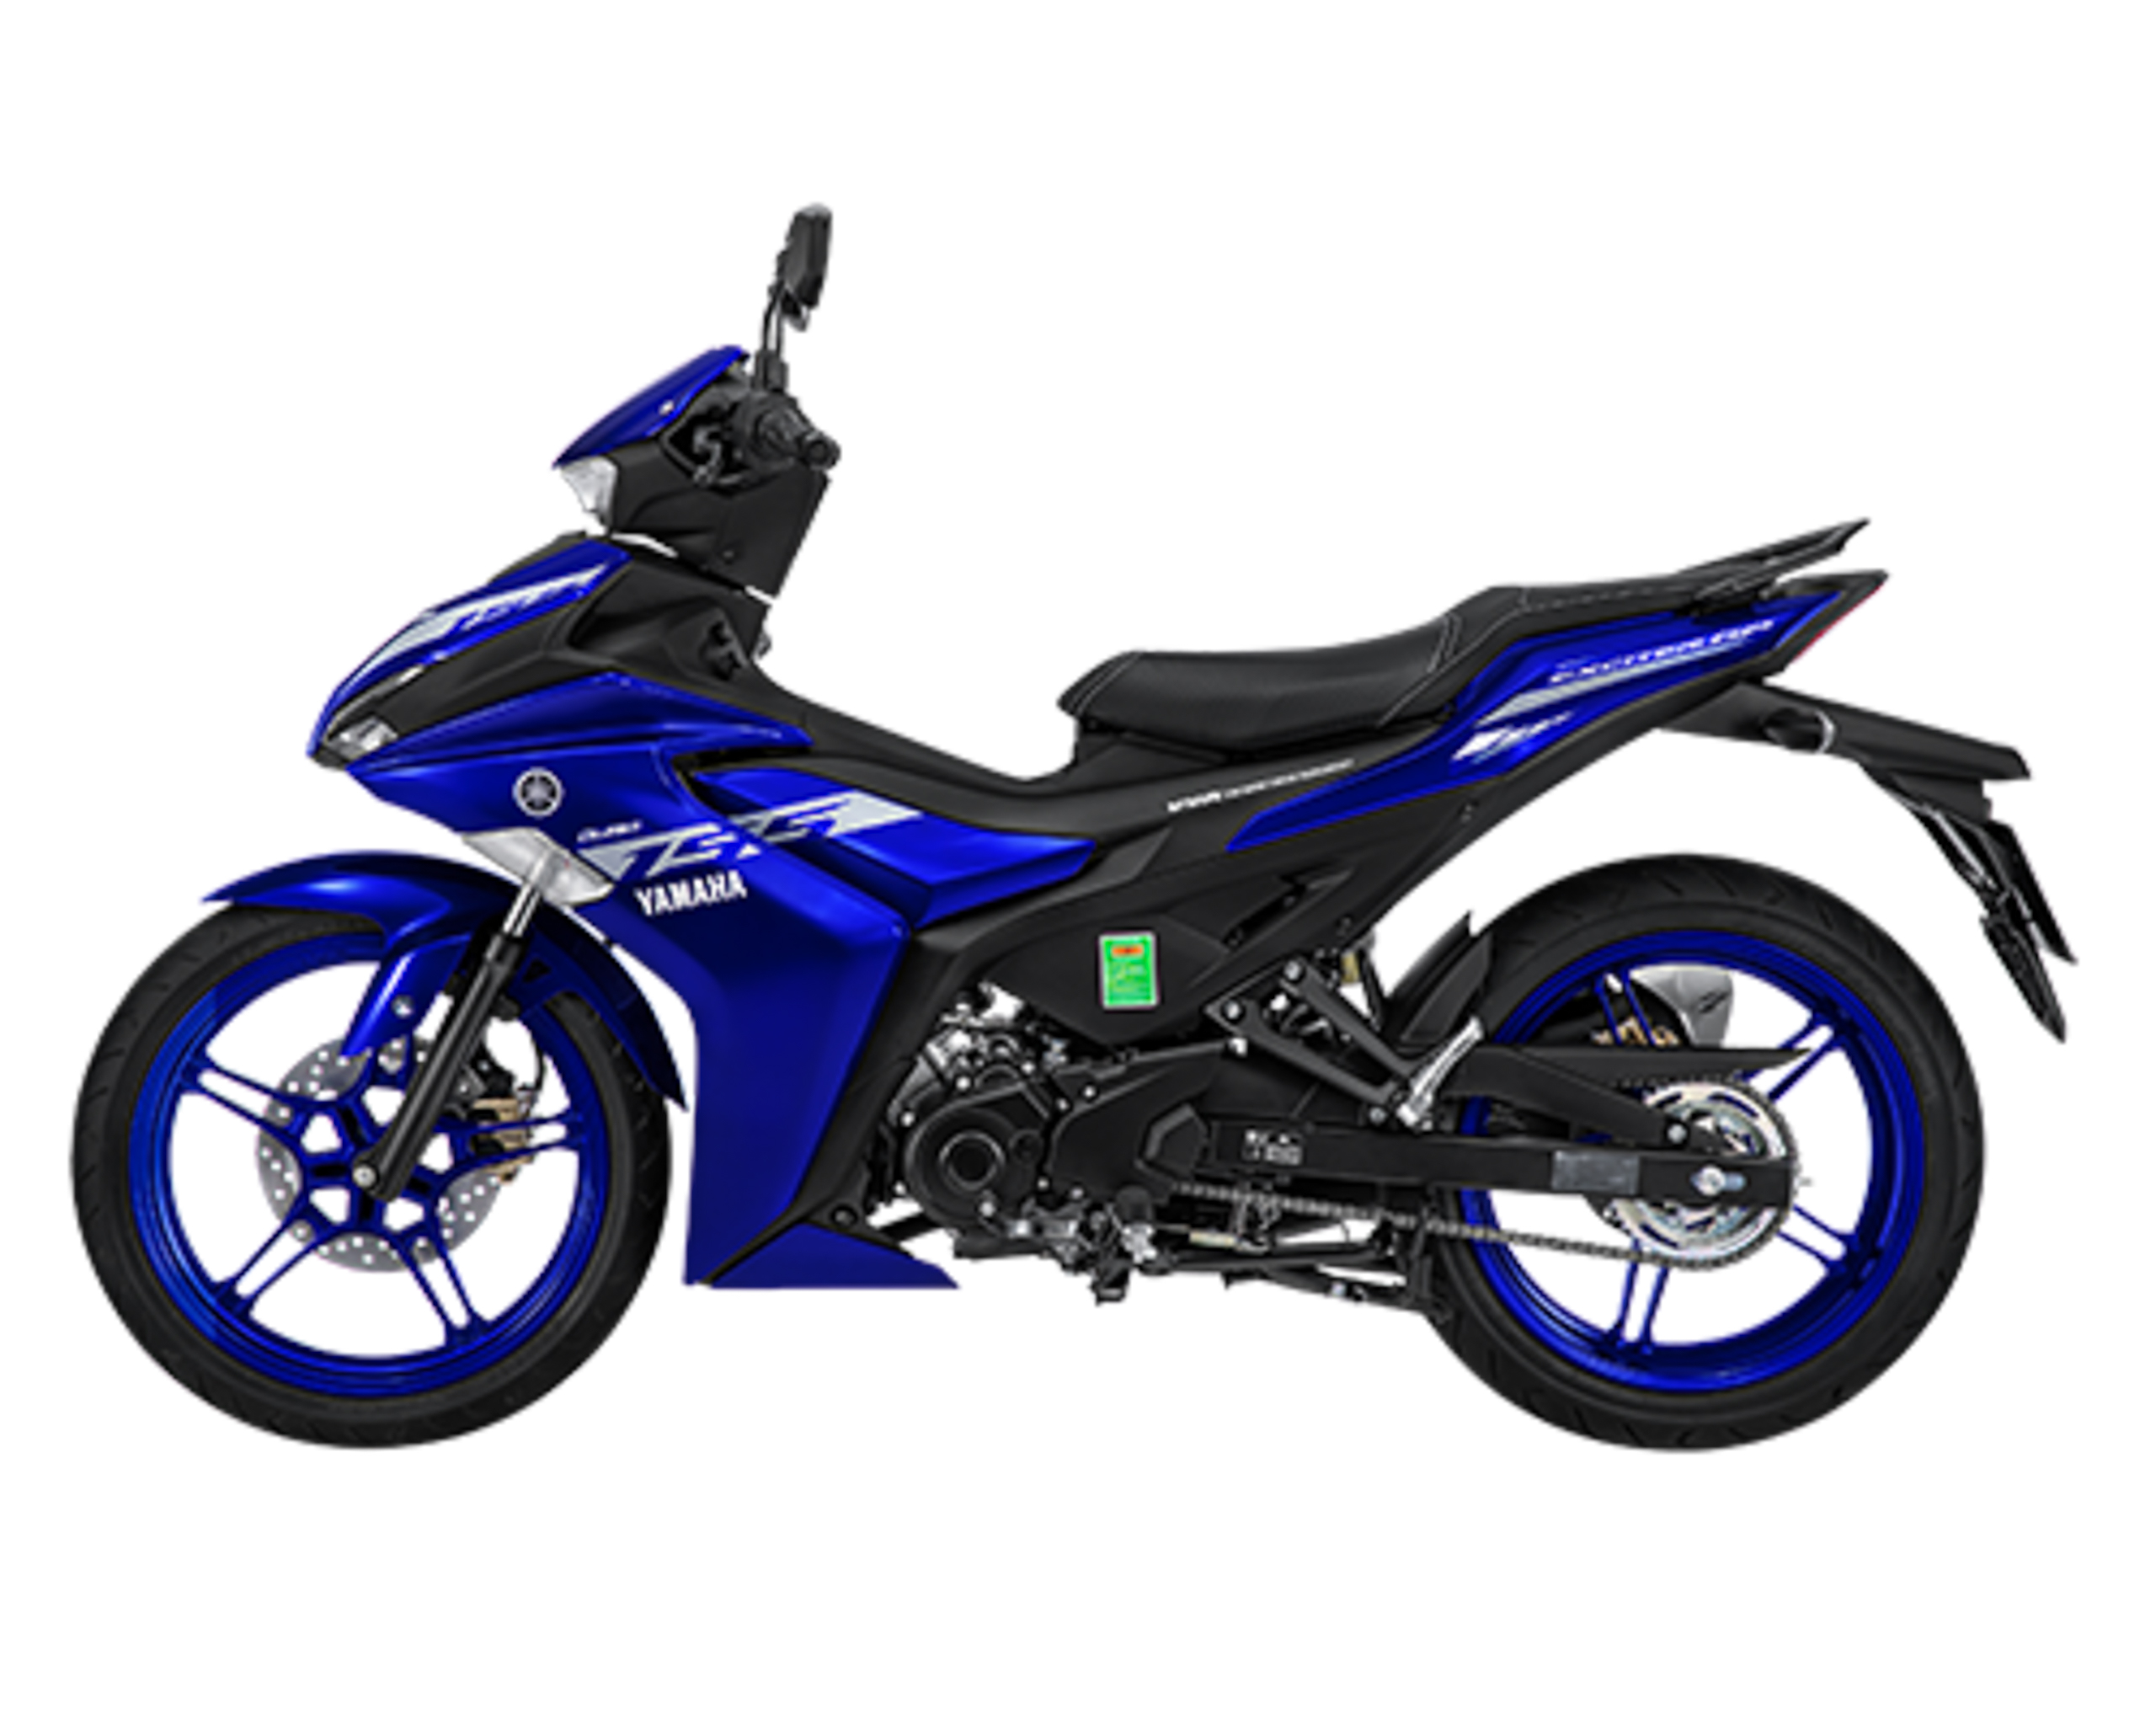 2021 Yamaha Exciter launched in in Vietnam, RM8,235 Yamaha Exciter 155 ...